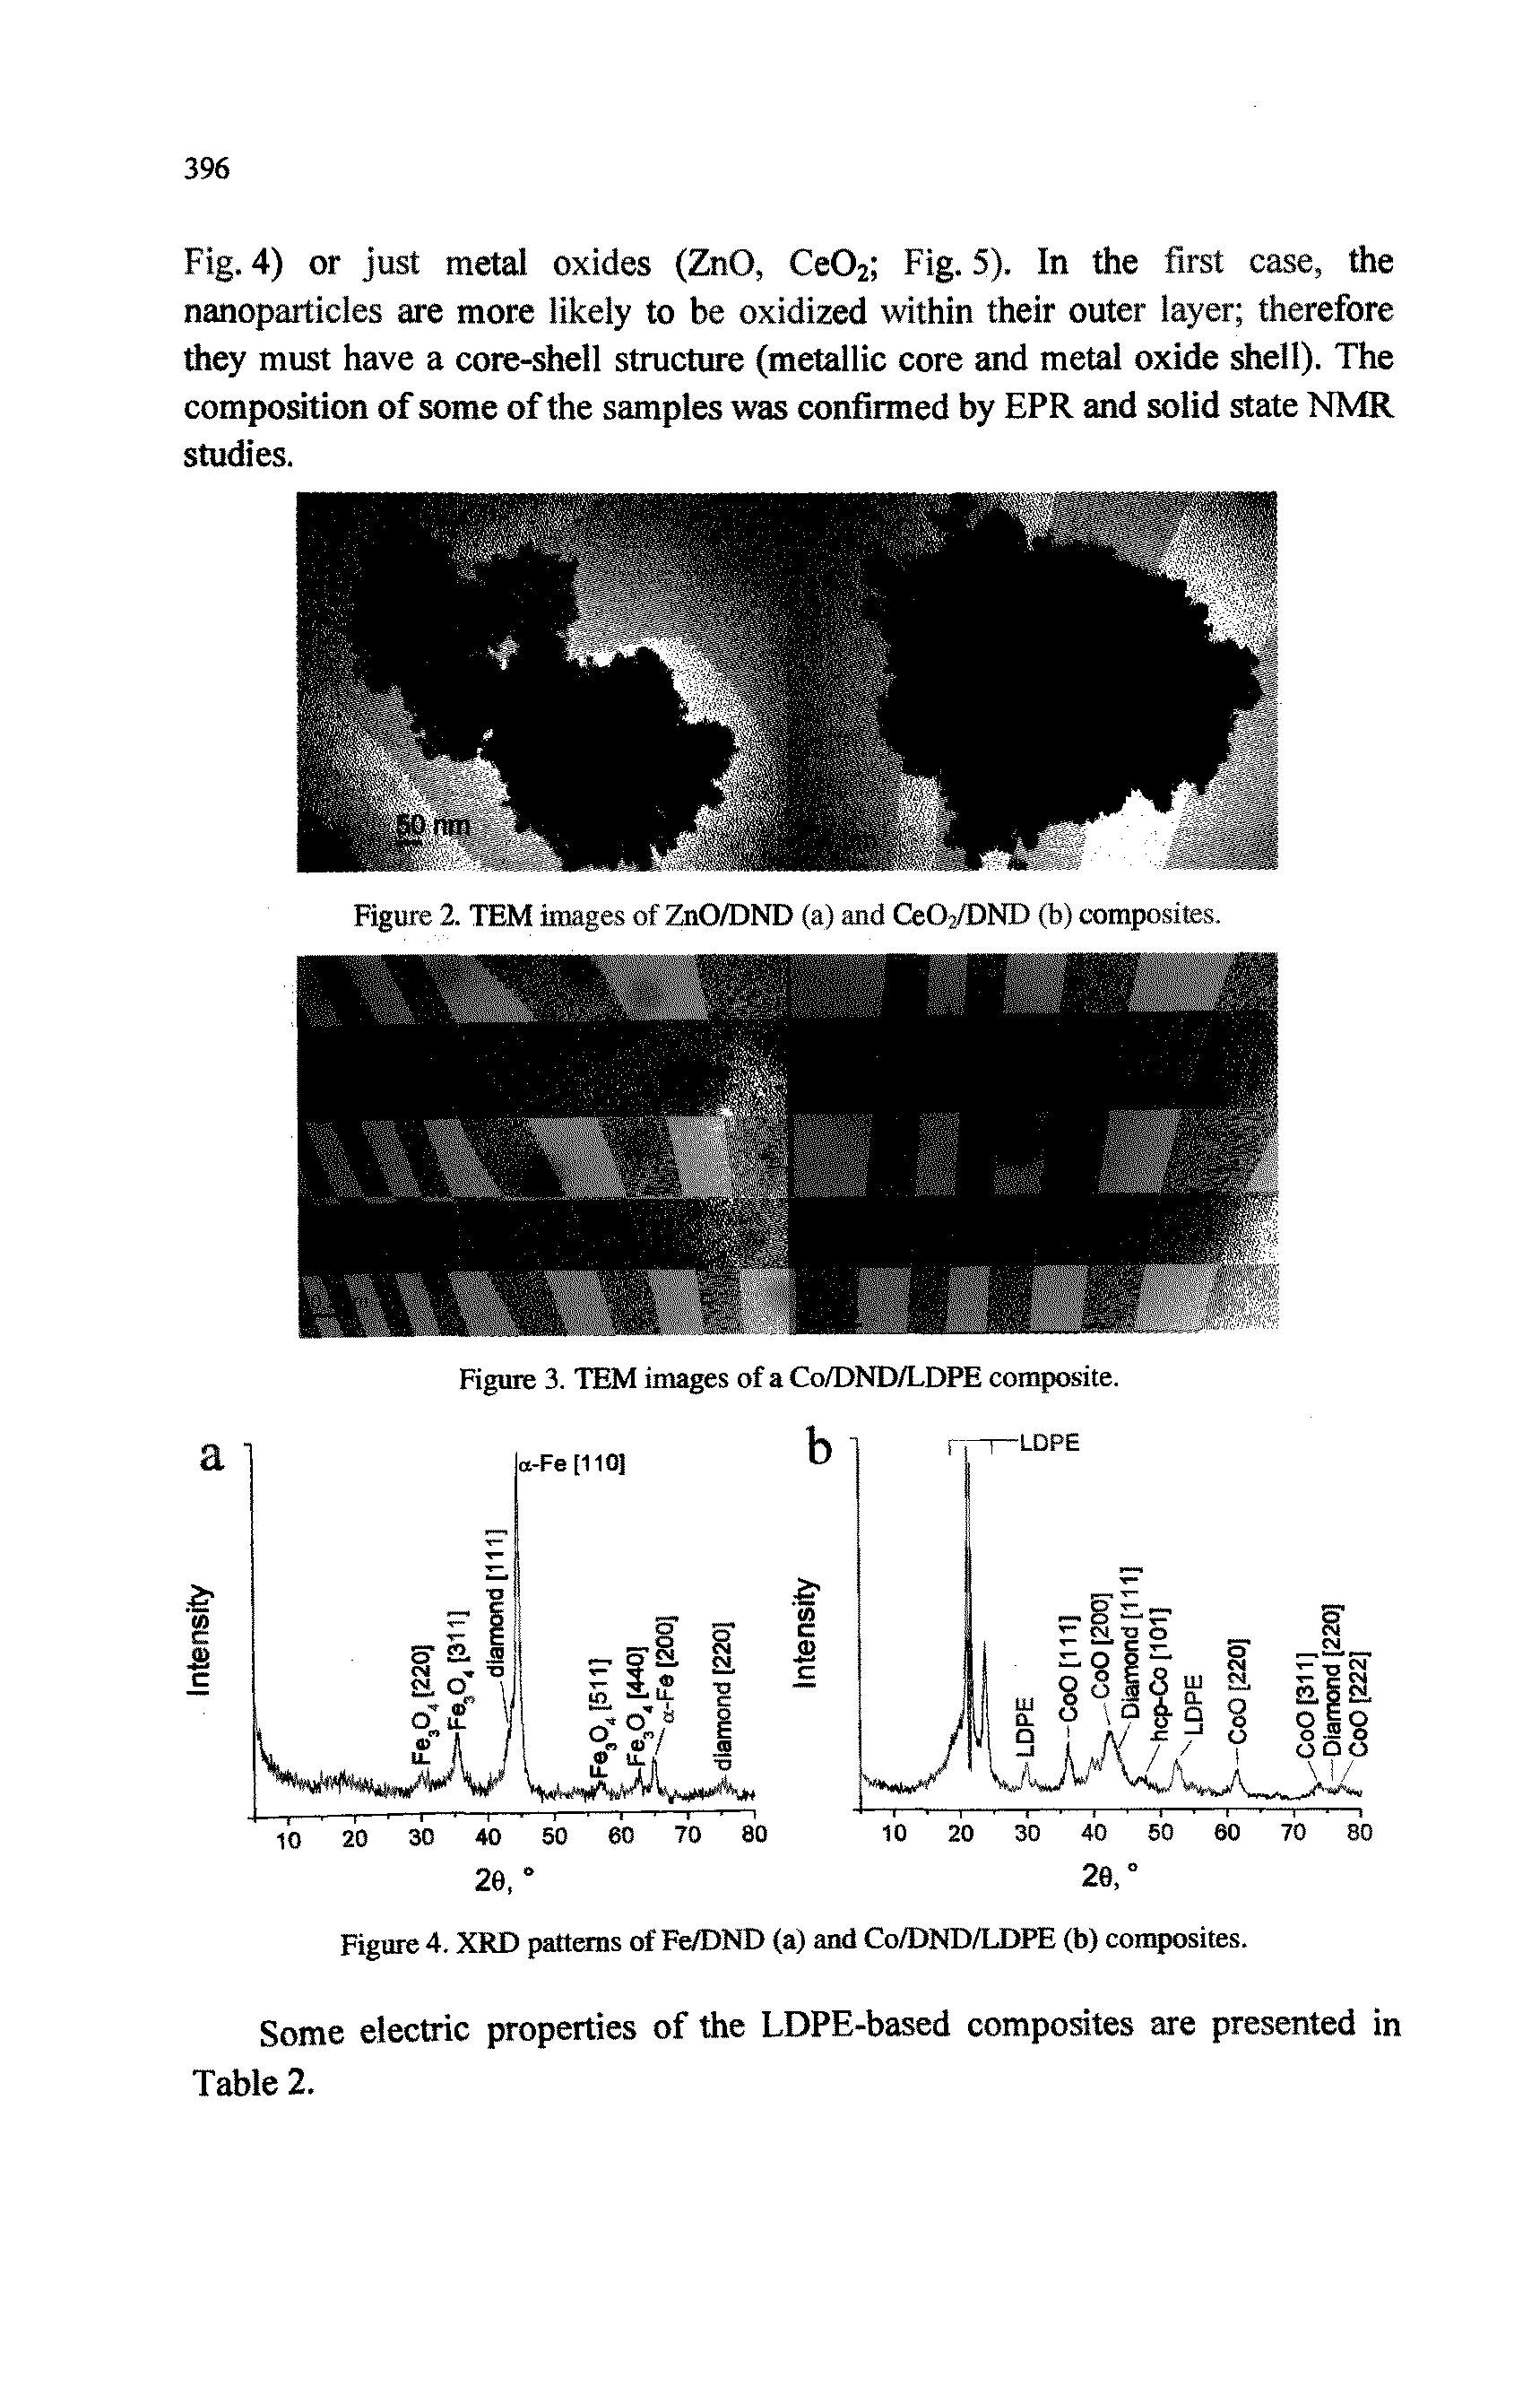 Fig. 4) or just metal oxides (ZnO, CtO, Fig. 5). In the first case, the nanoparticles are more likely to be oxidized within their outer layer therefore they must have a core-shell structure (metallic core and metal oxide shell). The composition of some of the samples was confirmed by EPR and solid state NMR studies.